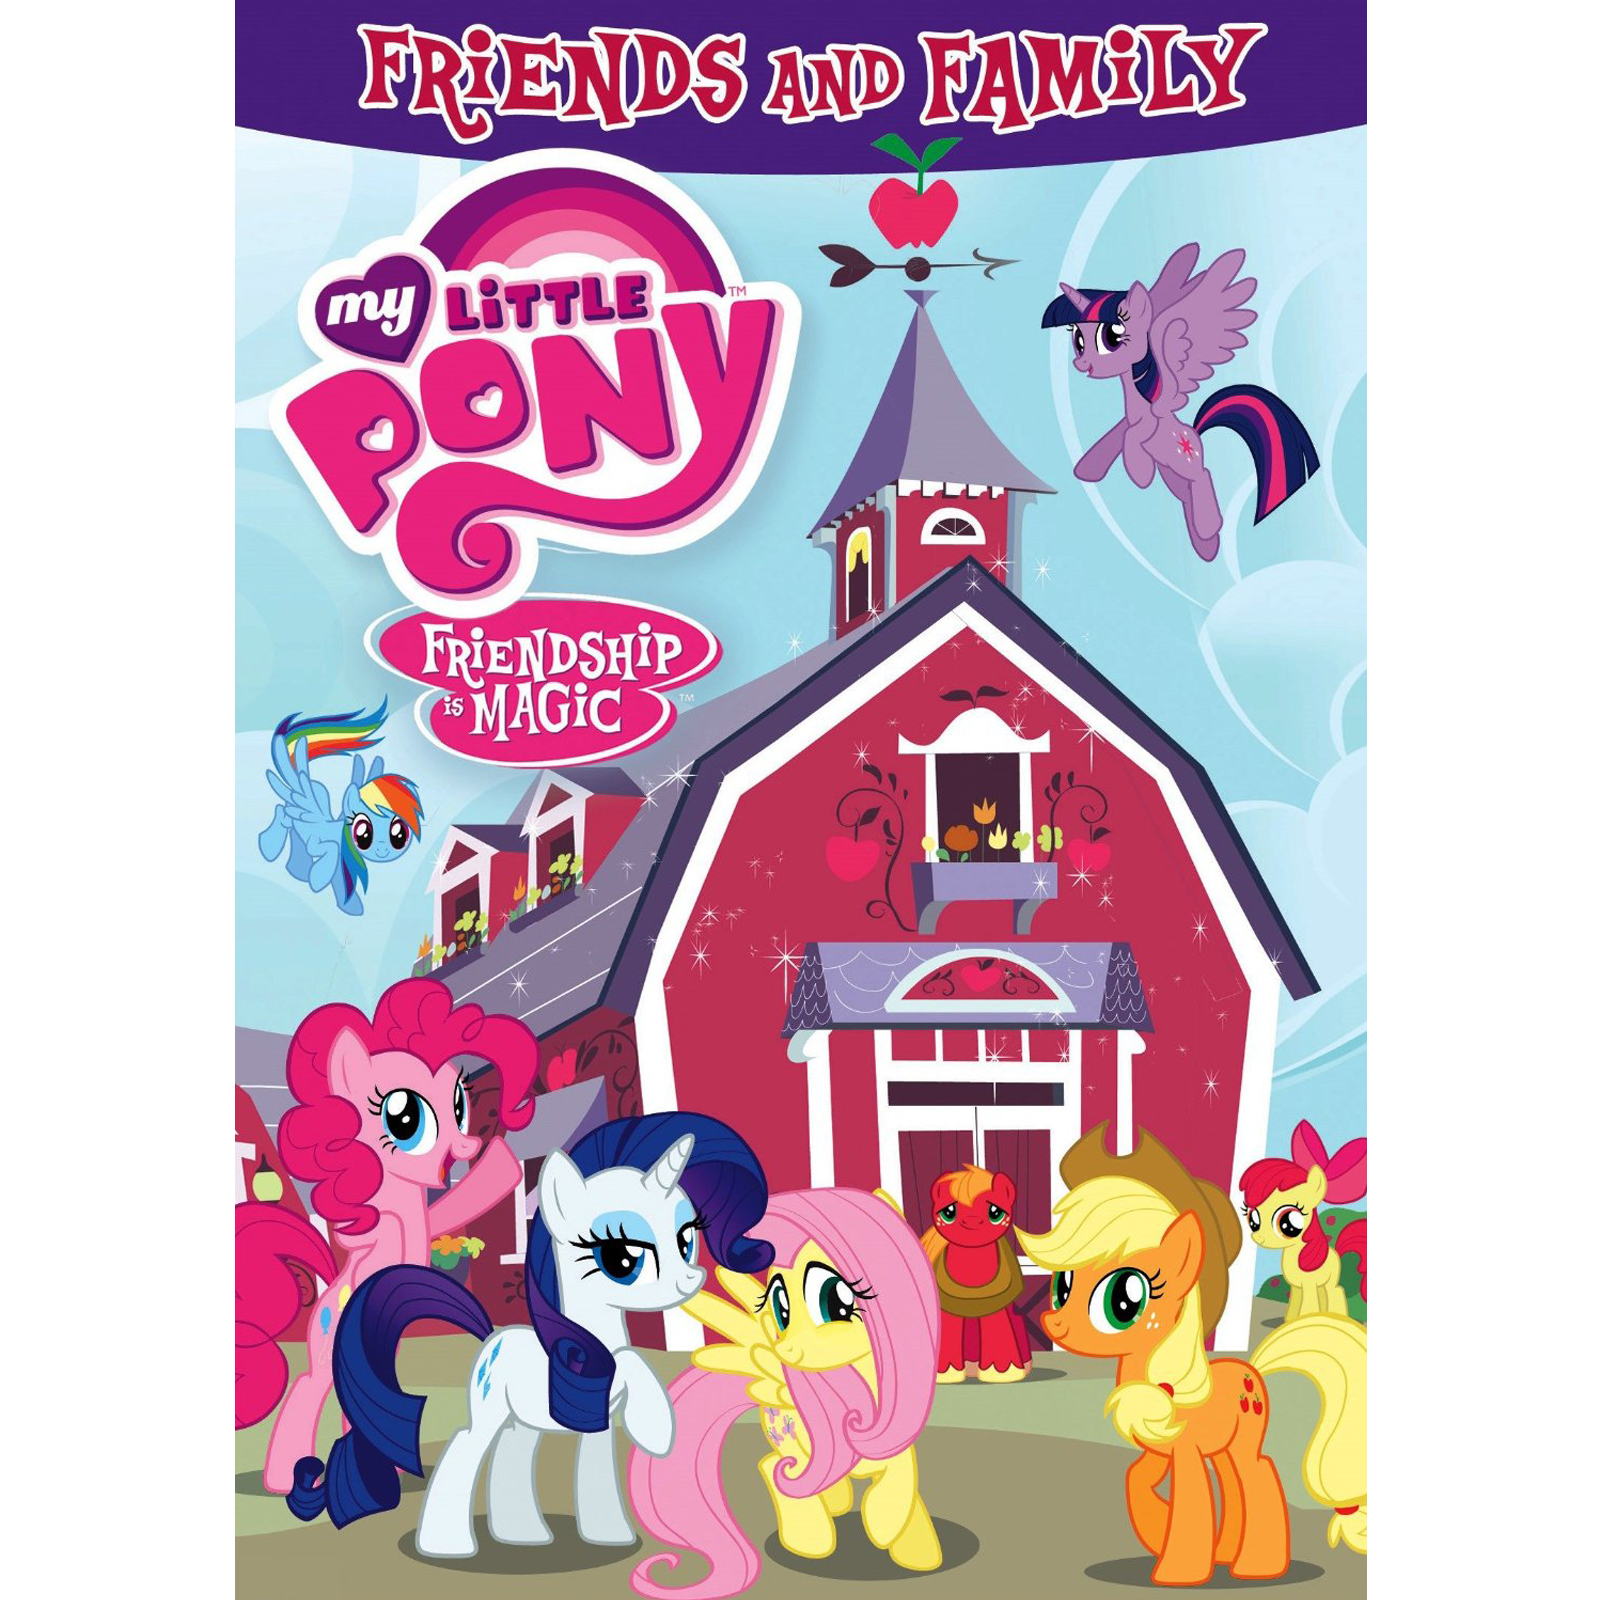 My Little Pony Friendship is Magic: Friends and Family (DVD)